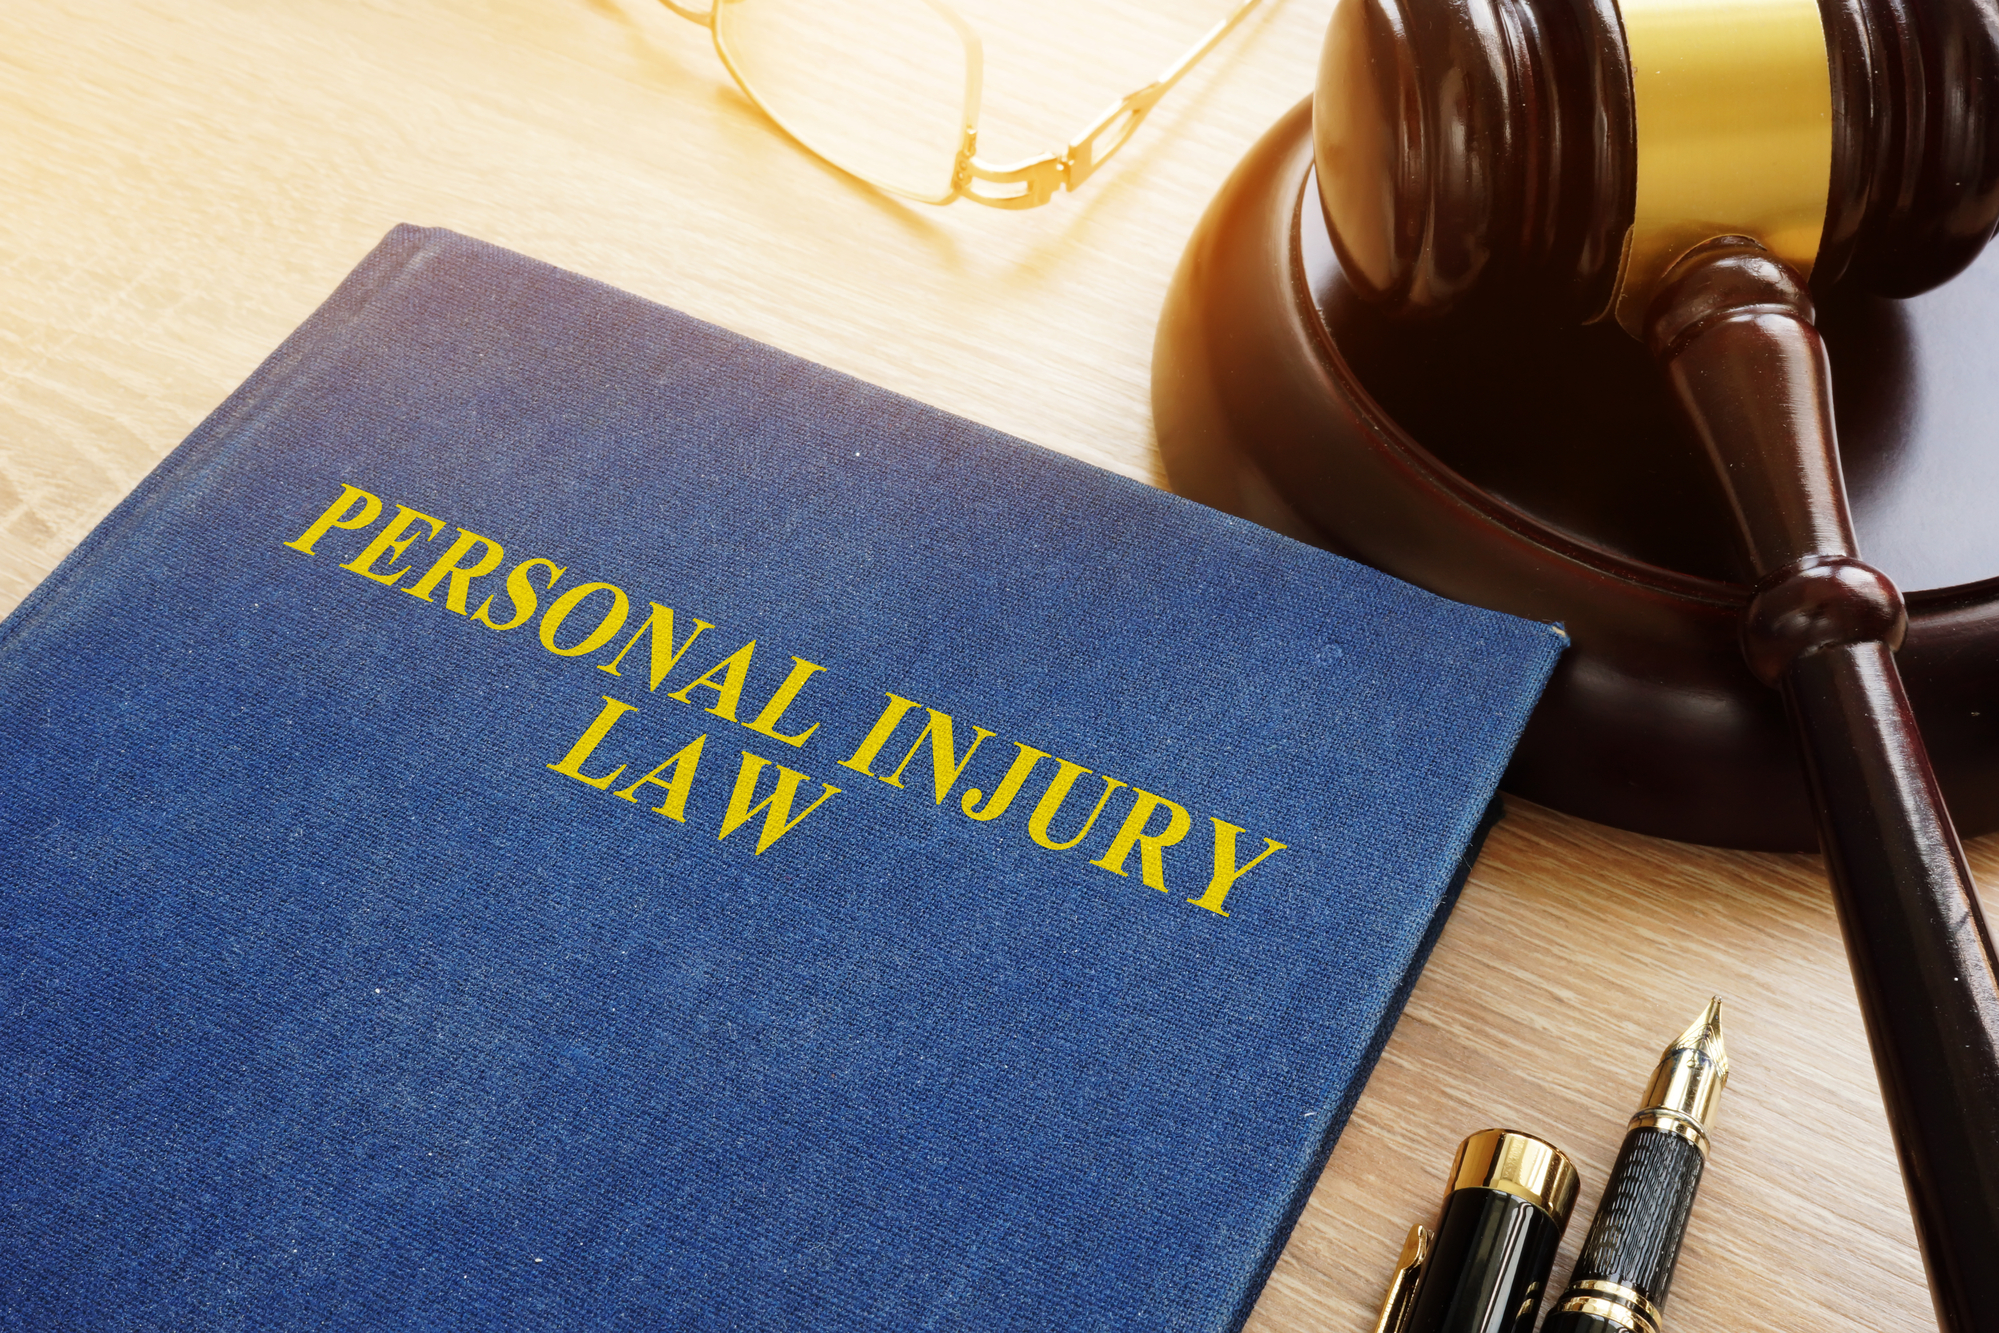 What To Discuss With A Personal Injury Lawyer - Personal injury law on a desk and gavel.